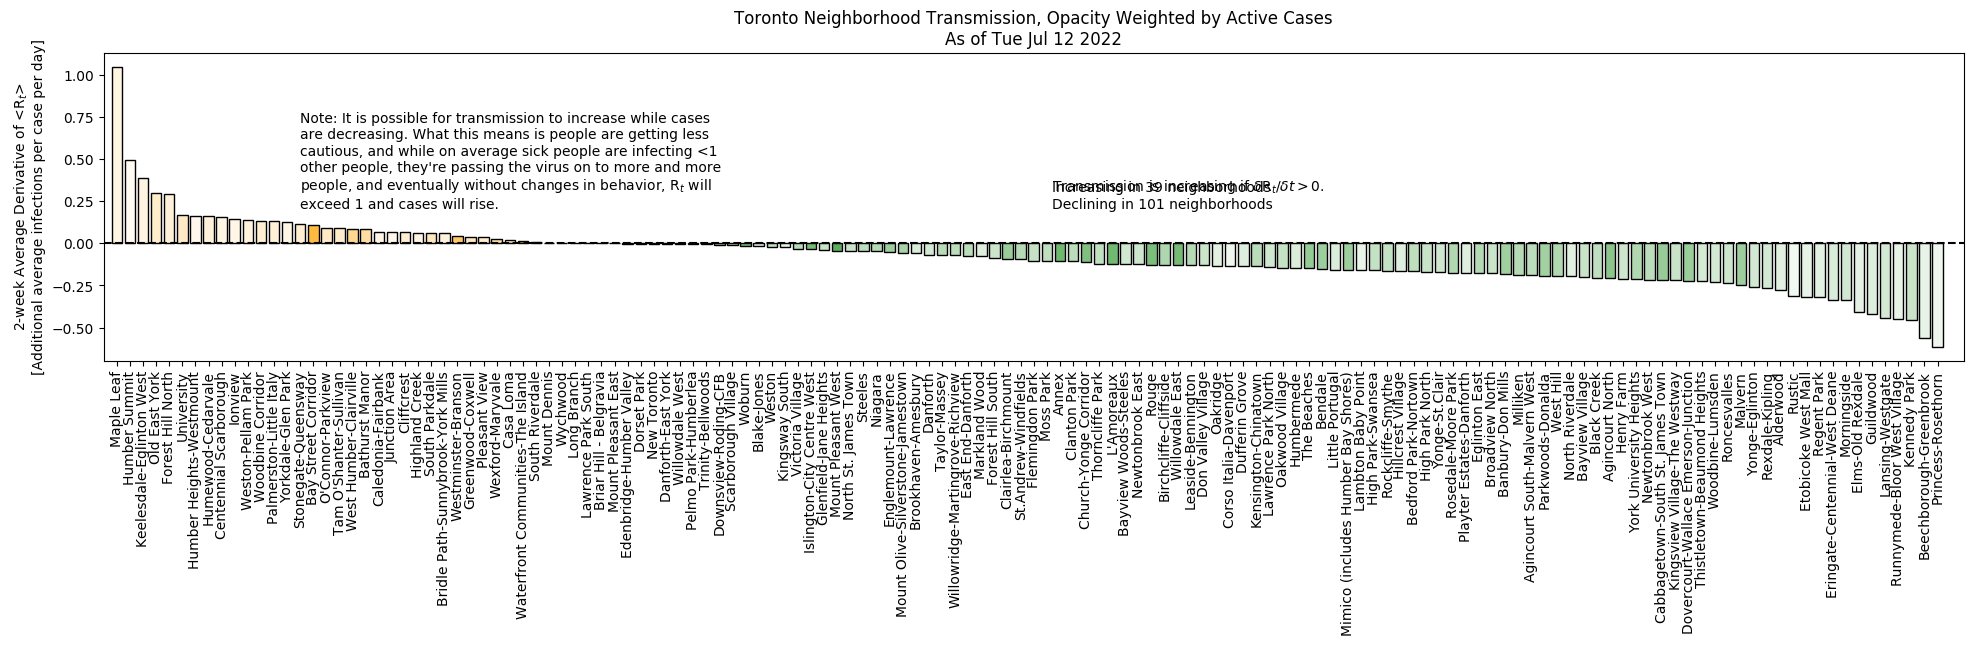 Current derivative of the effective reproductive numbers for all Toronto neighborhoods, with opacity weighted by current active cases.